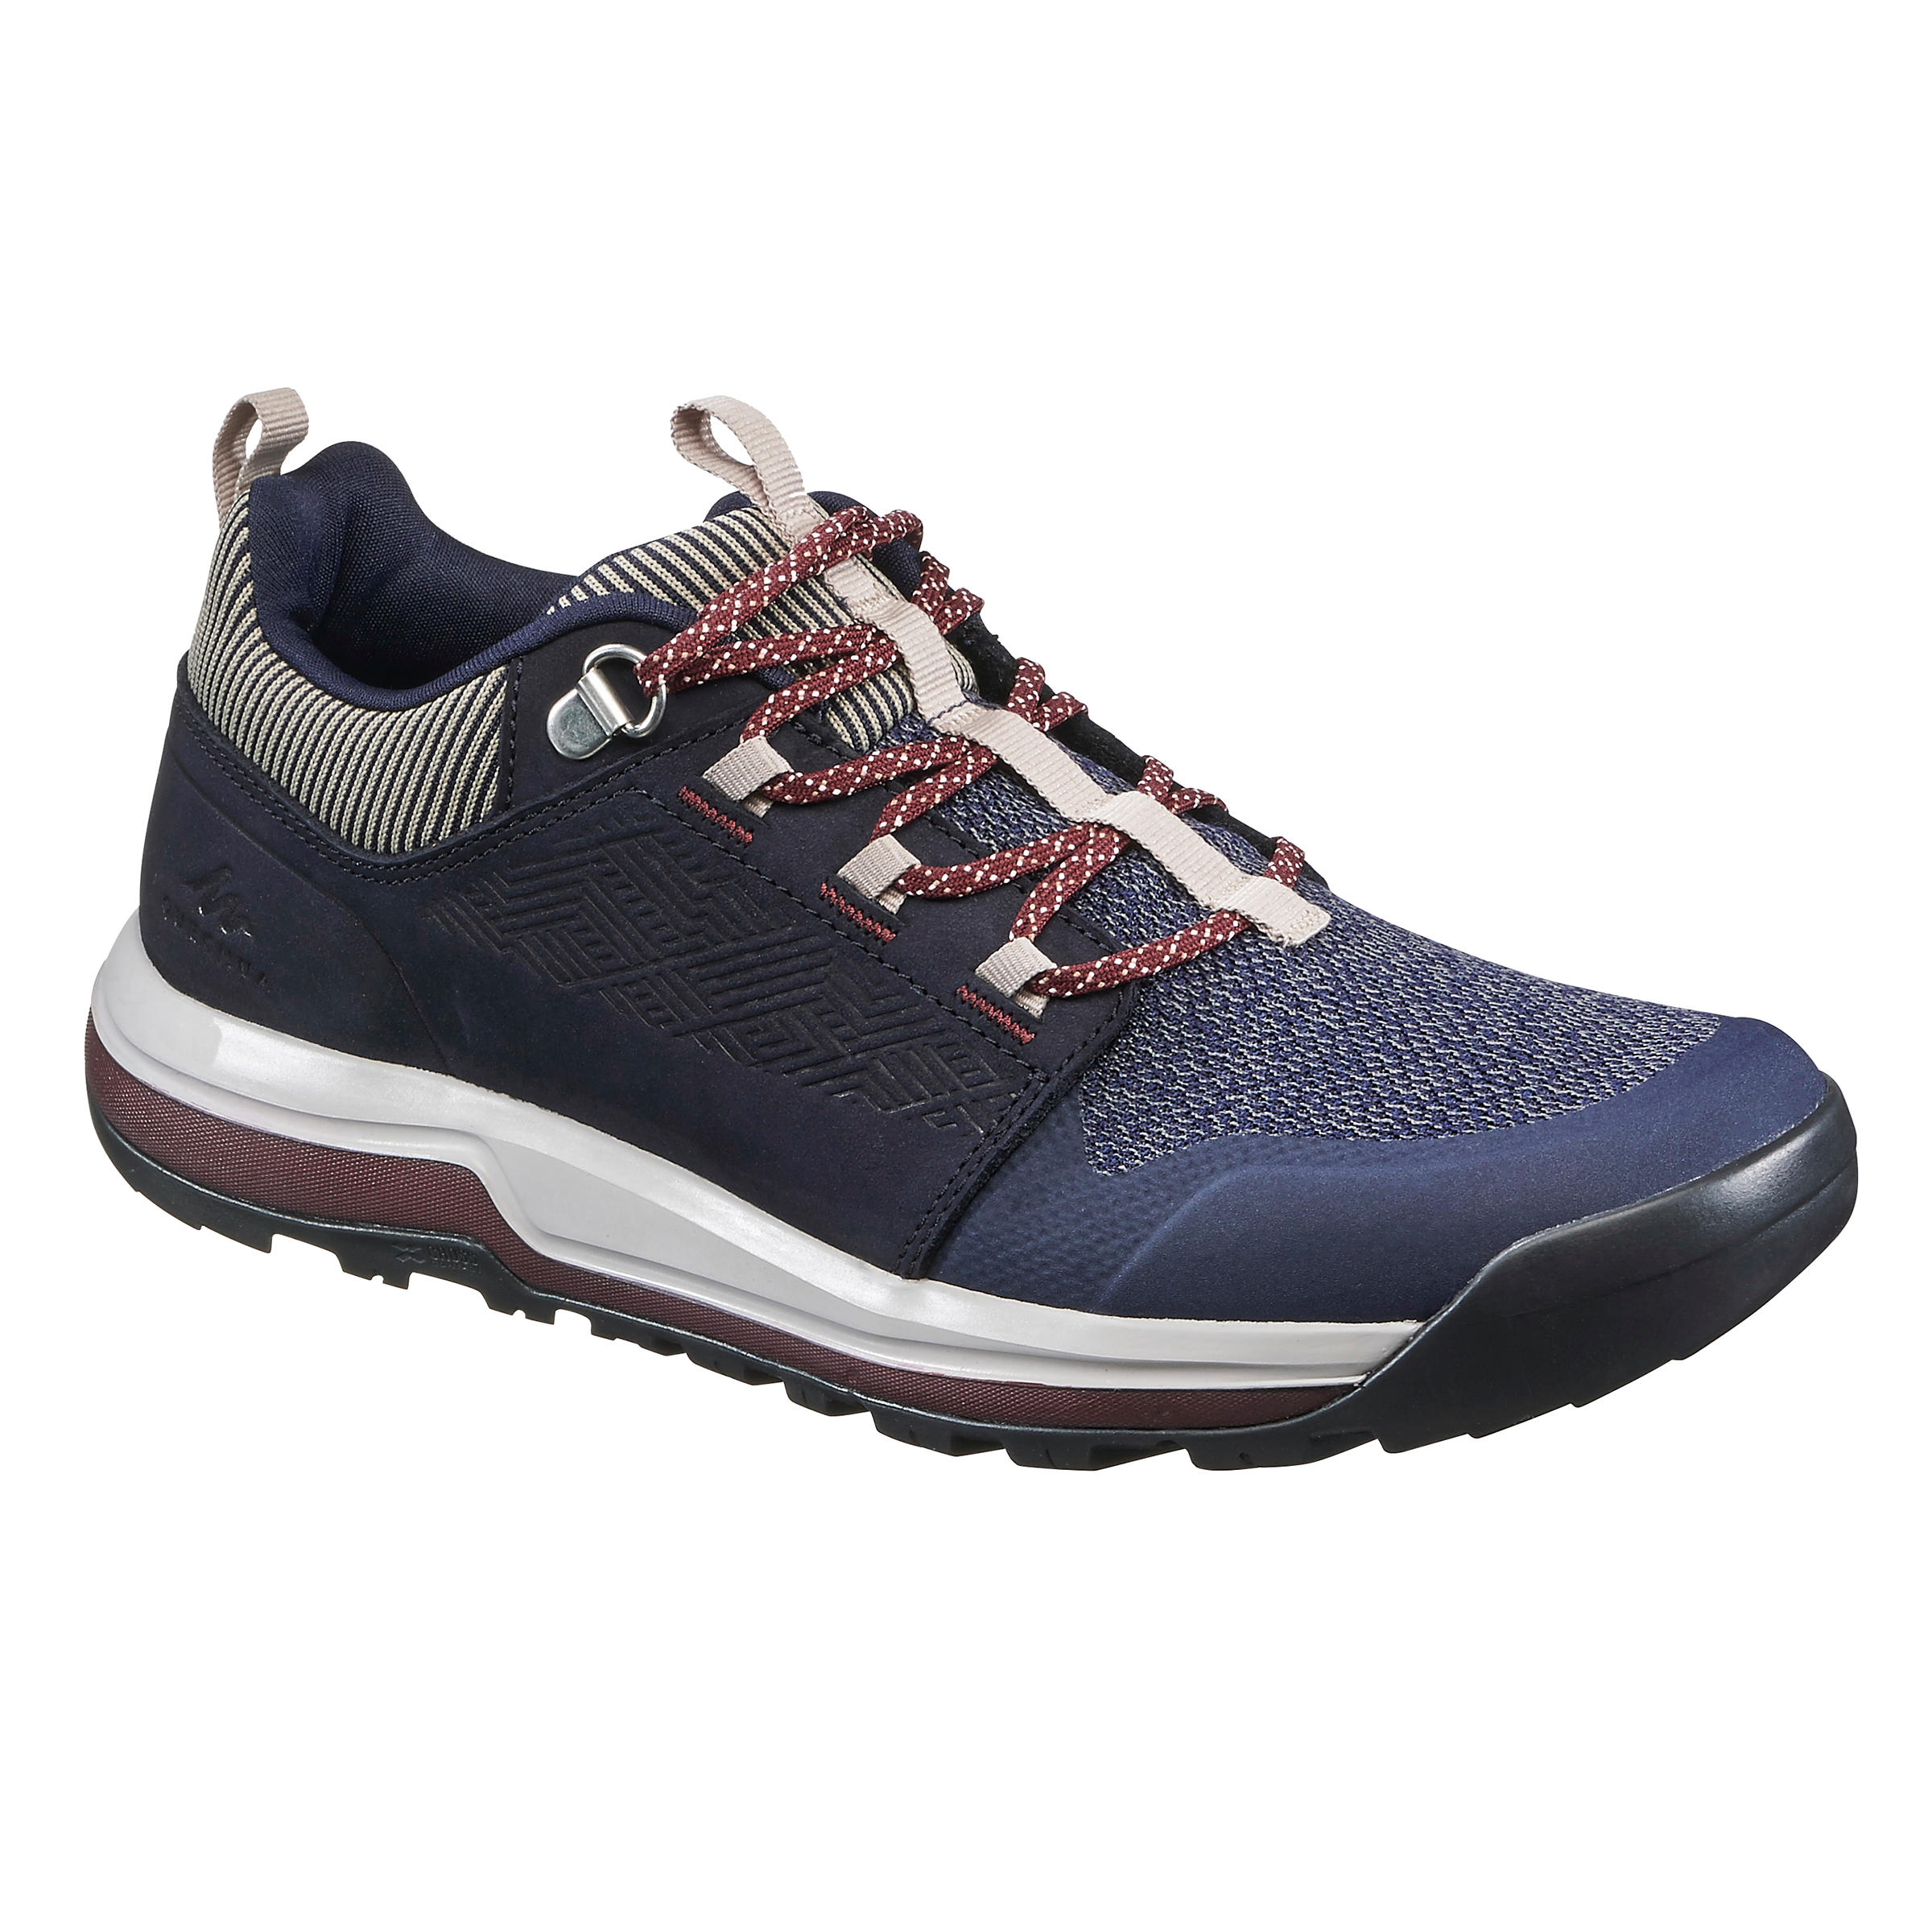 Women's Eco-Friendly Country Walking Shoes - Navy 5/9